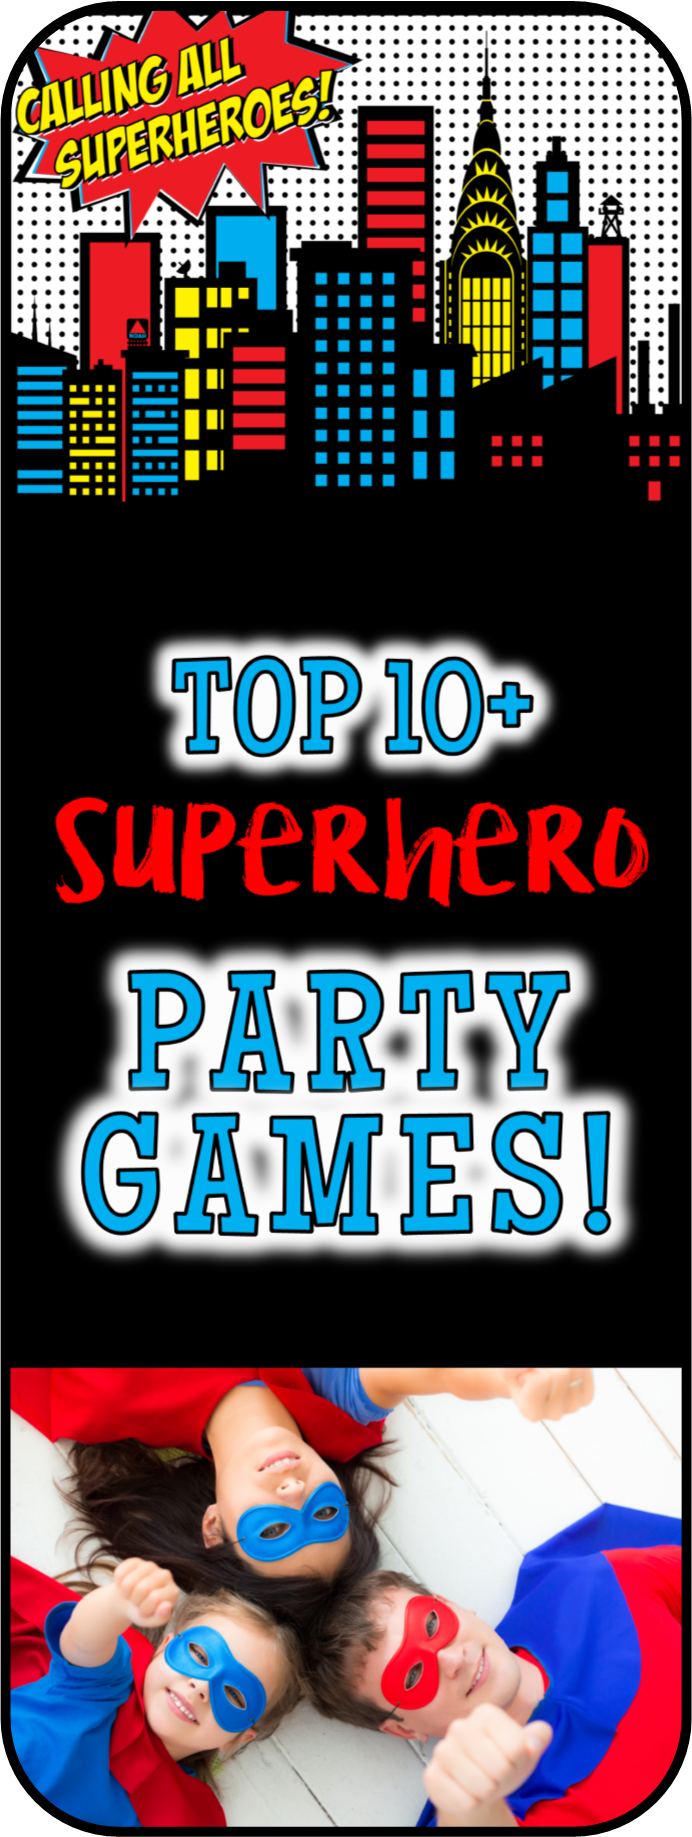 Top Superhero Party Games And Superhero Activities,Stockinette Stitch